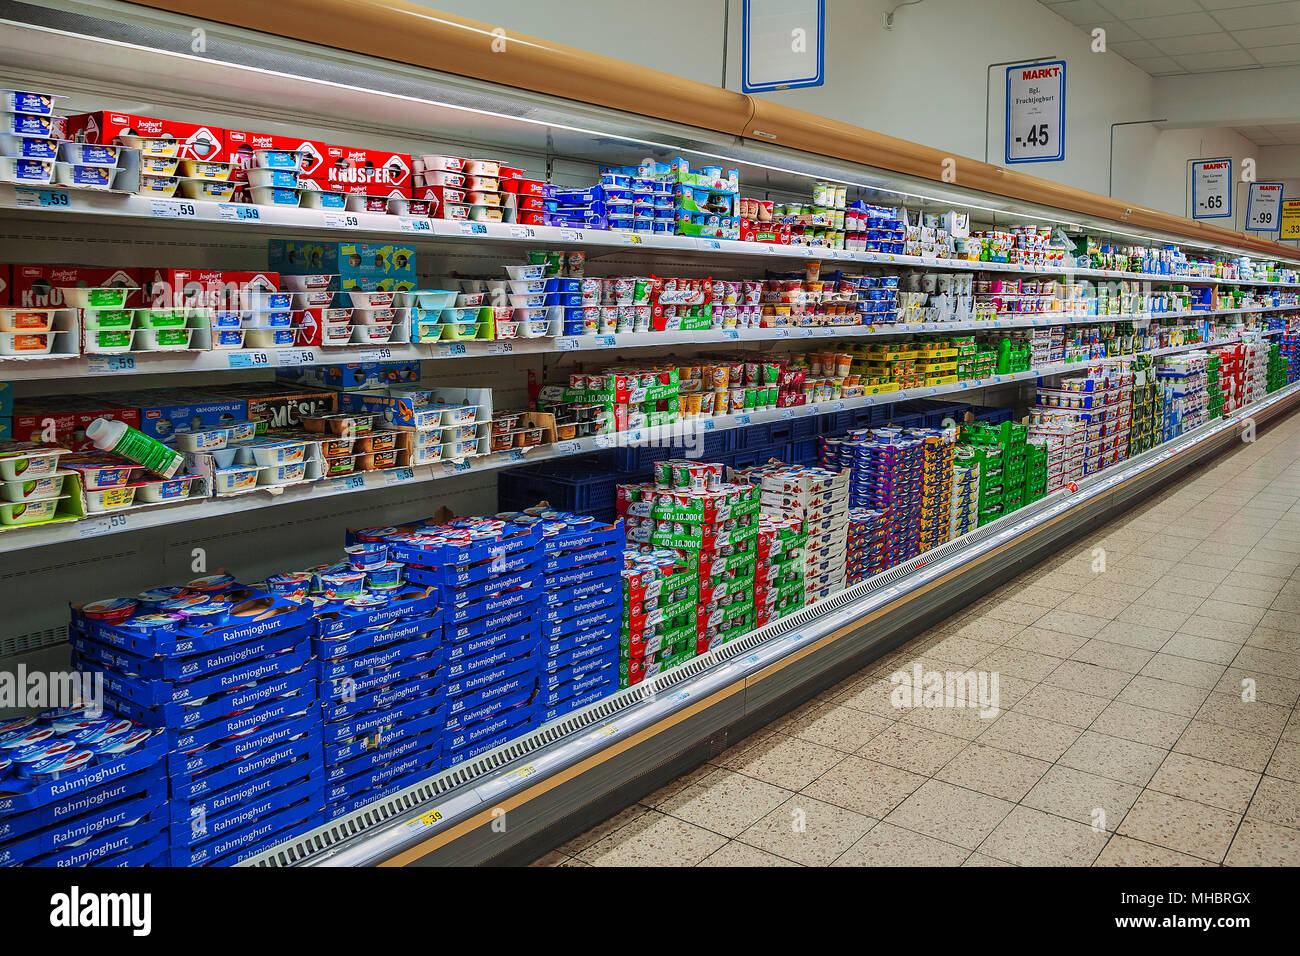 Shelf with dairy products in supermarkets, Munich, Upper Bavaria, Bavaria, Germany Stock Photo